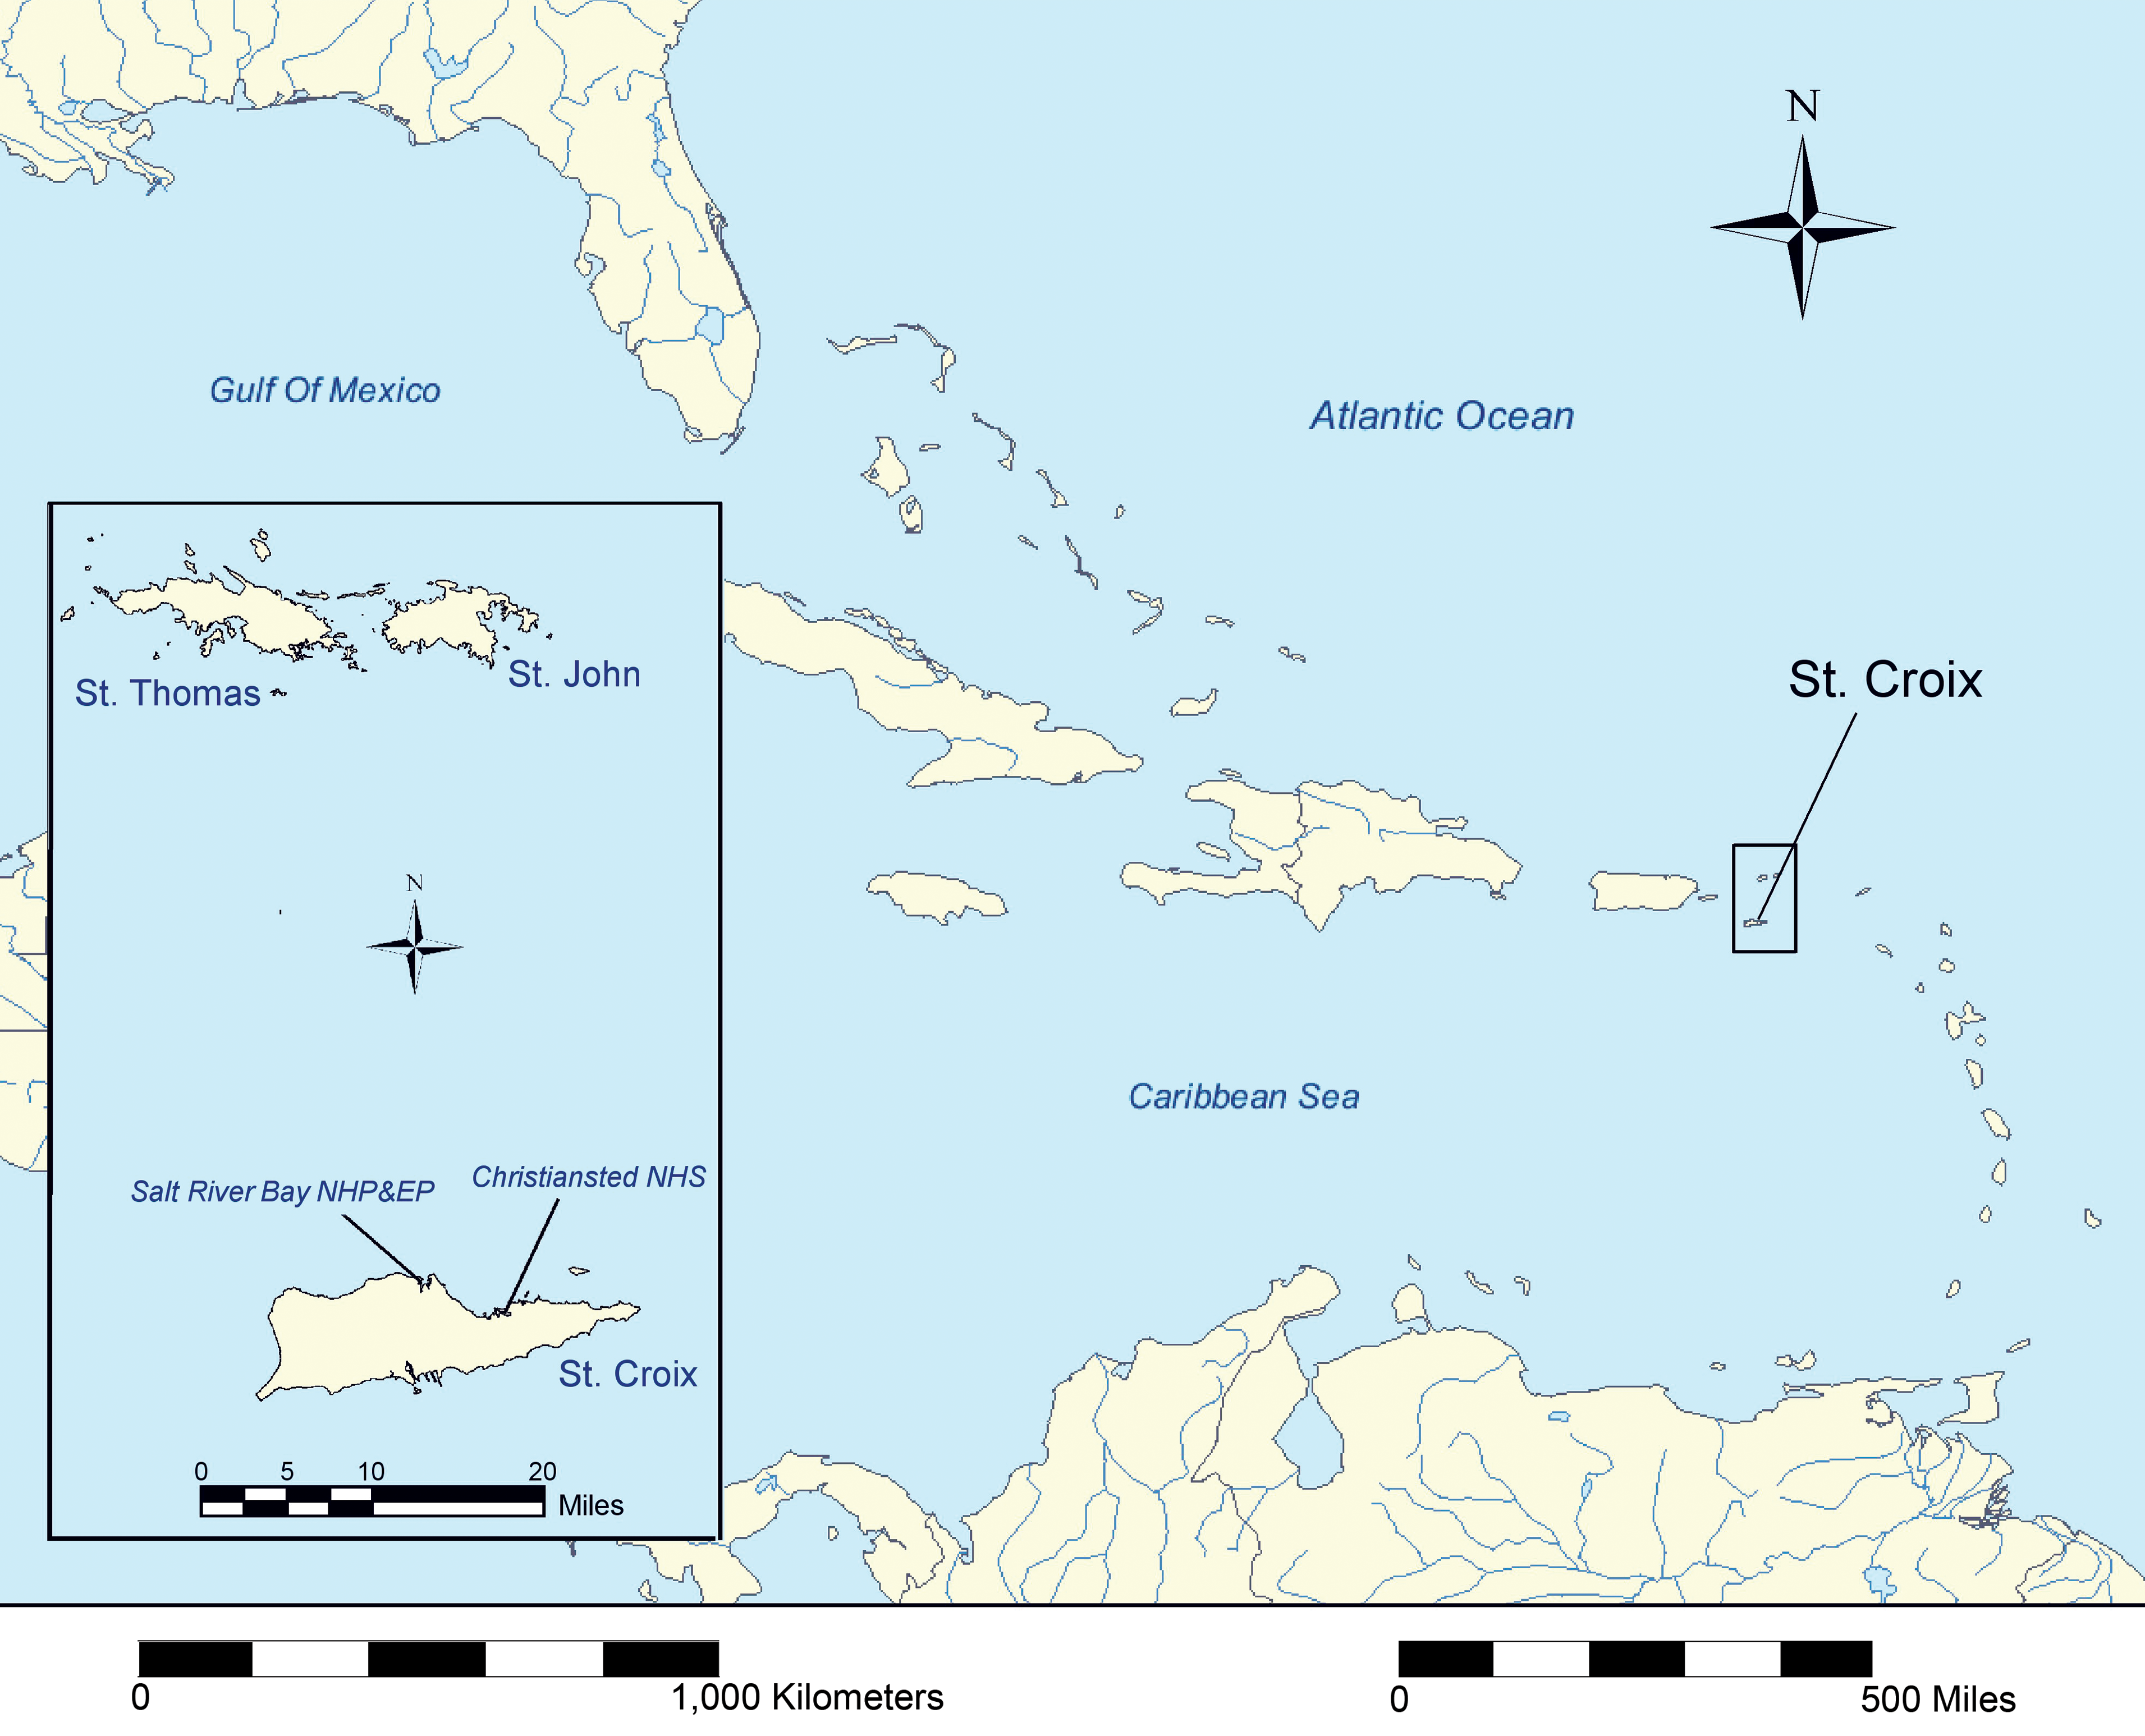 General map of Caribbean and St. Croix